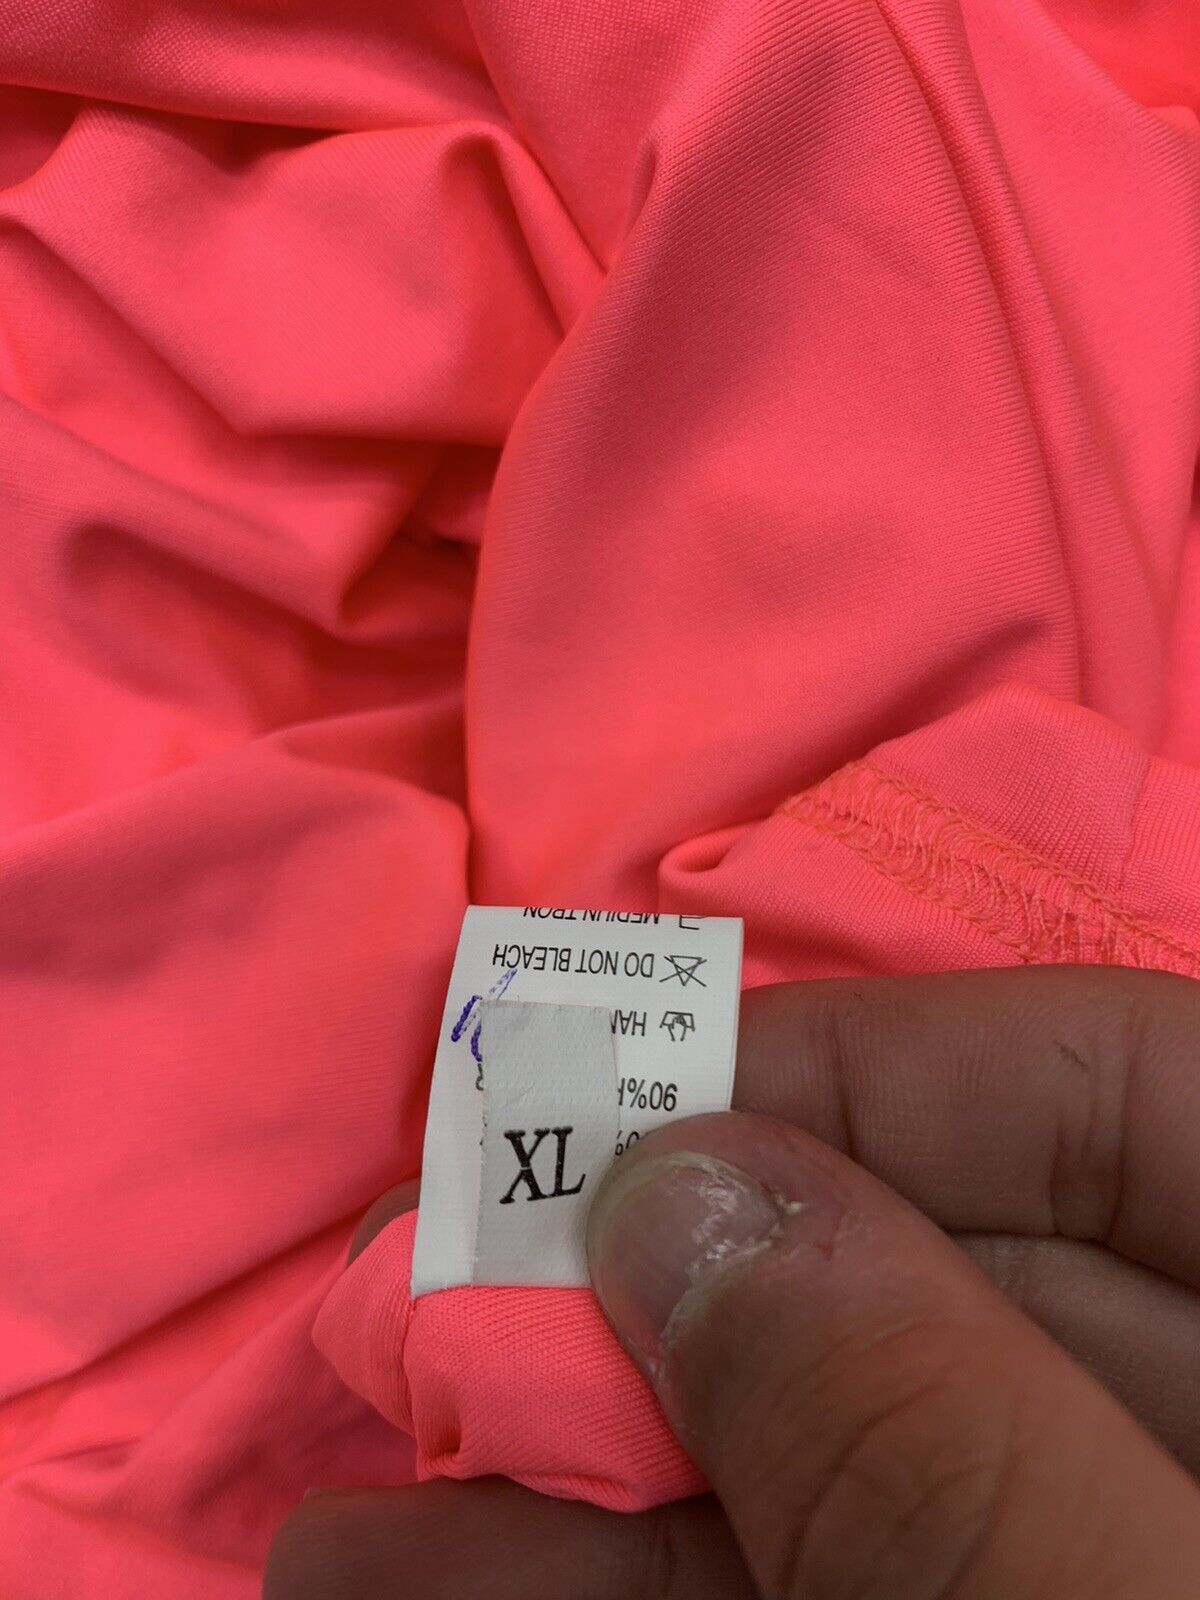 Unbranded Womens Hot Pink Side Ruched Dress Size XL - beyond exchange